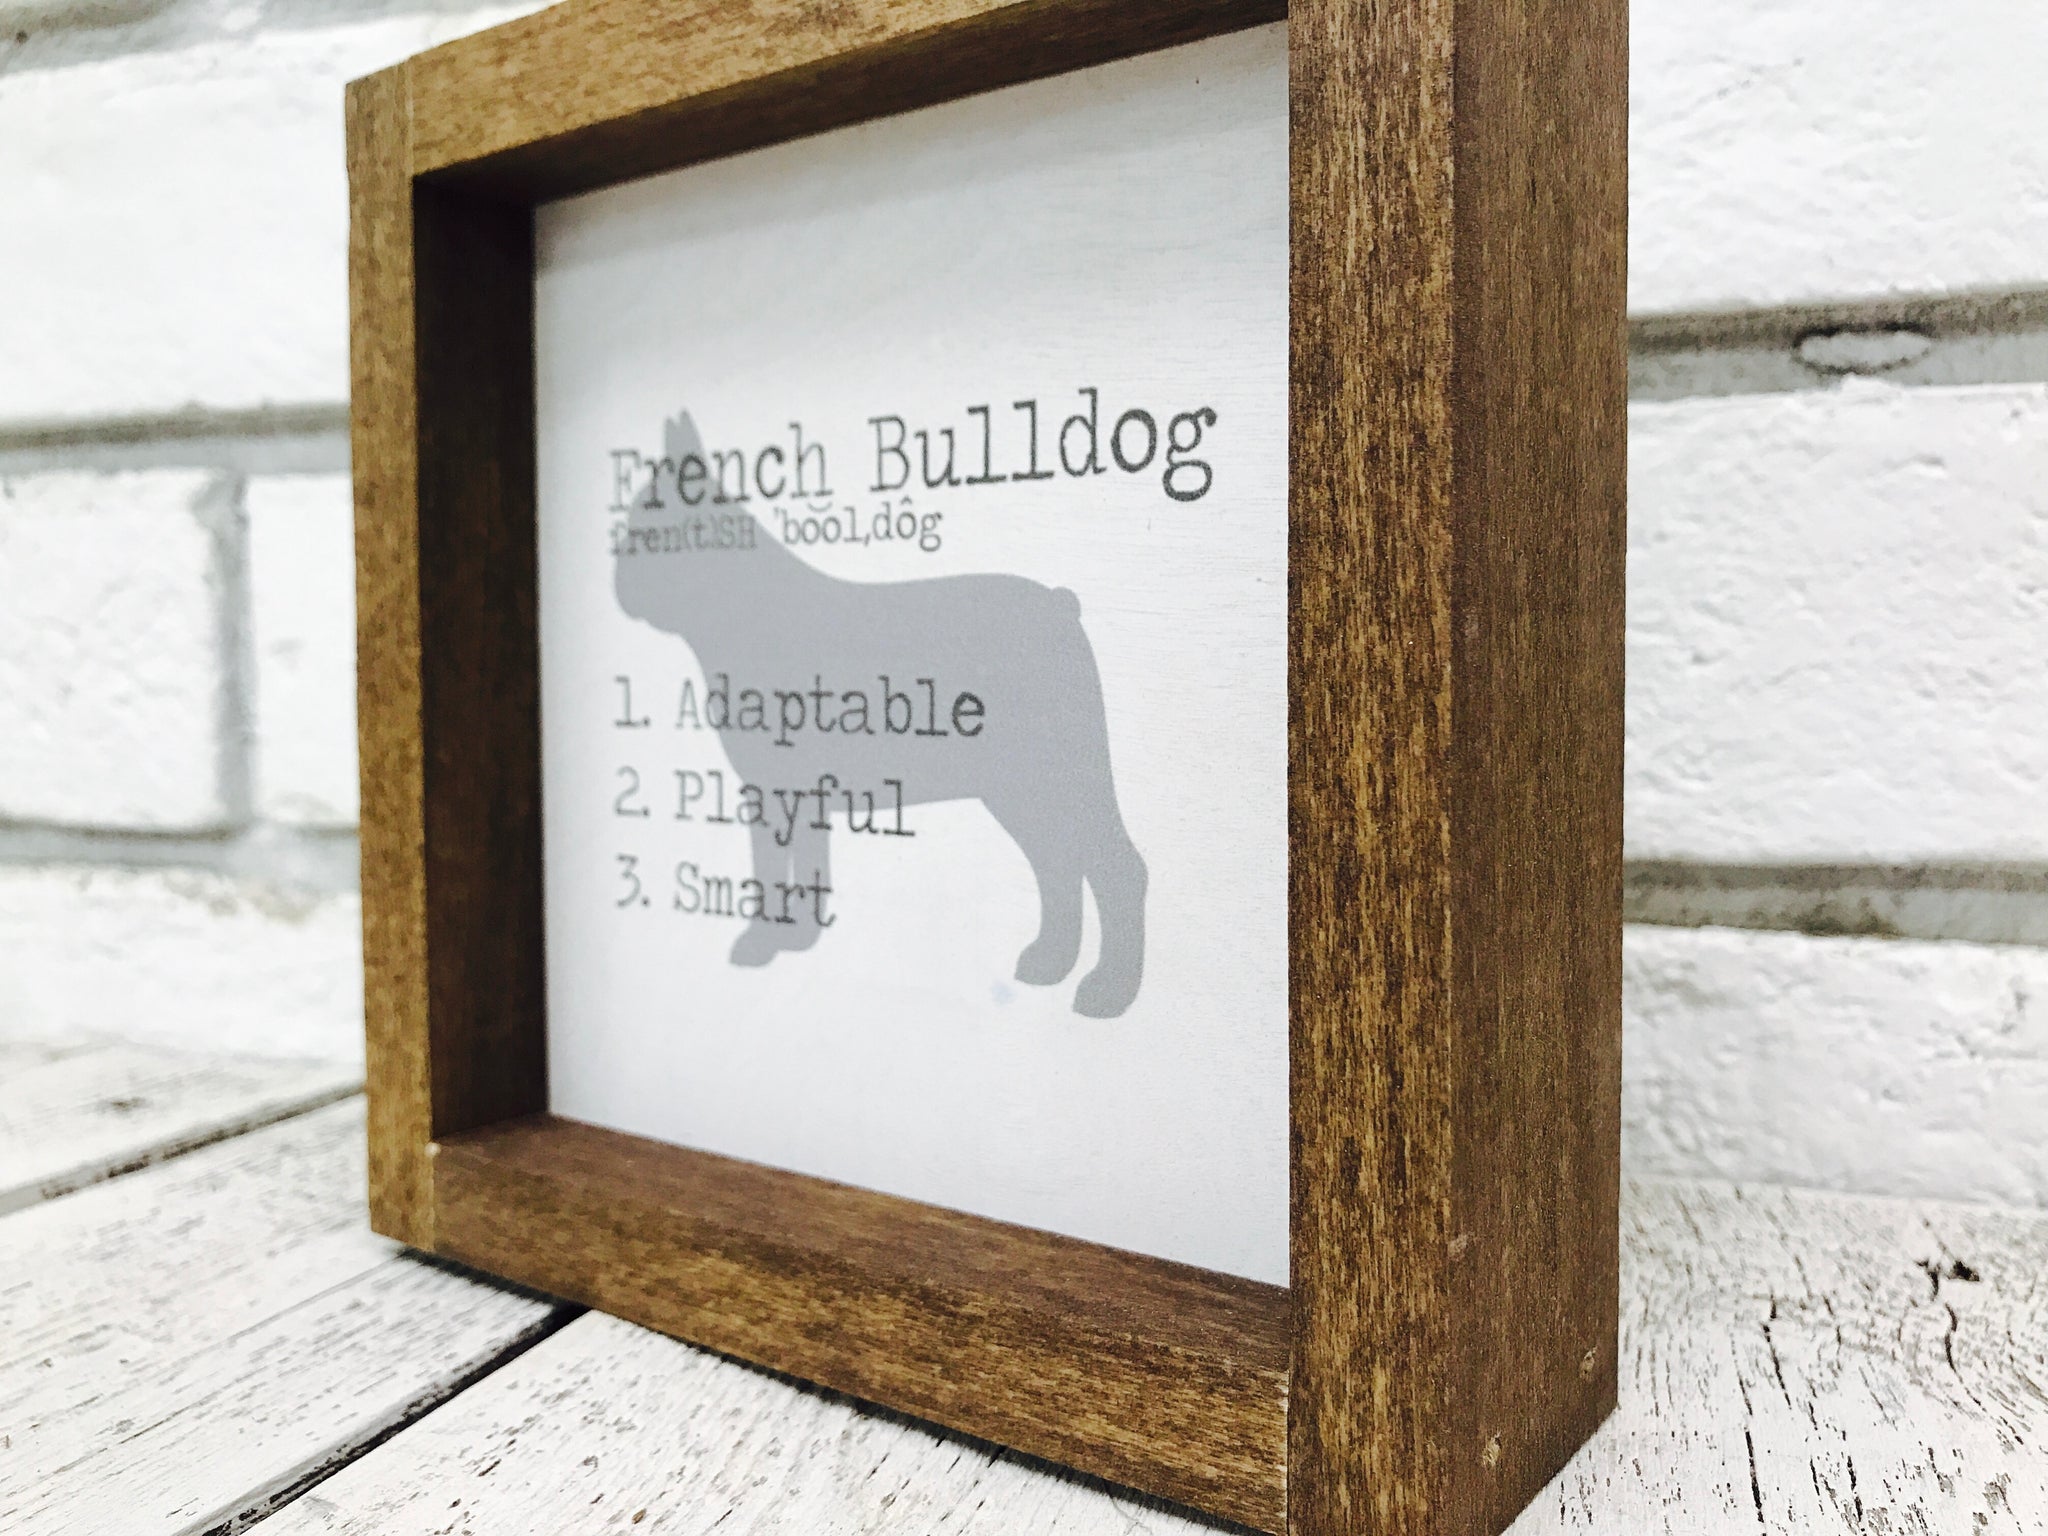 Amazing Bulldog Signs of all time Don t miss out 